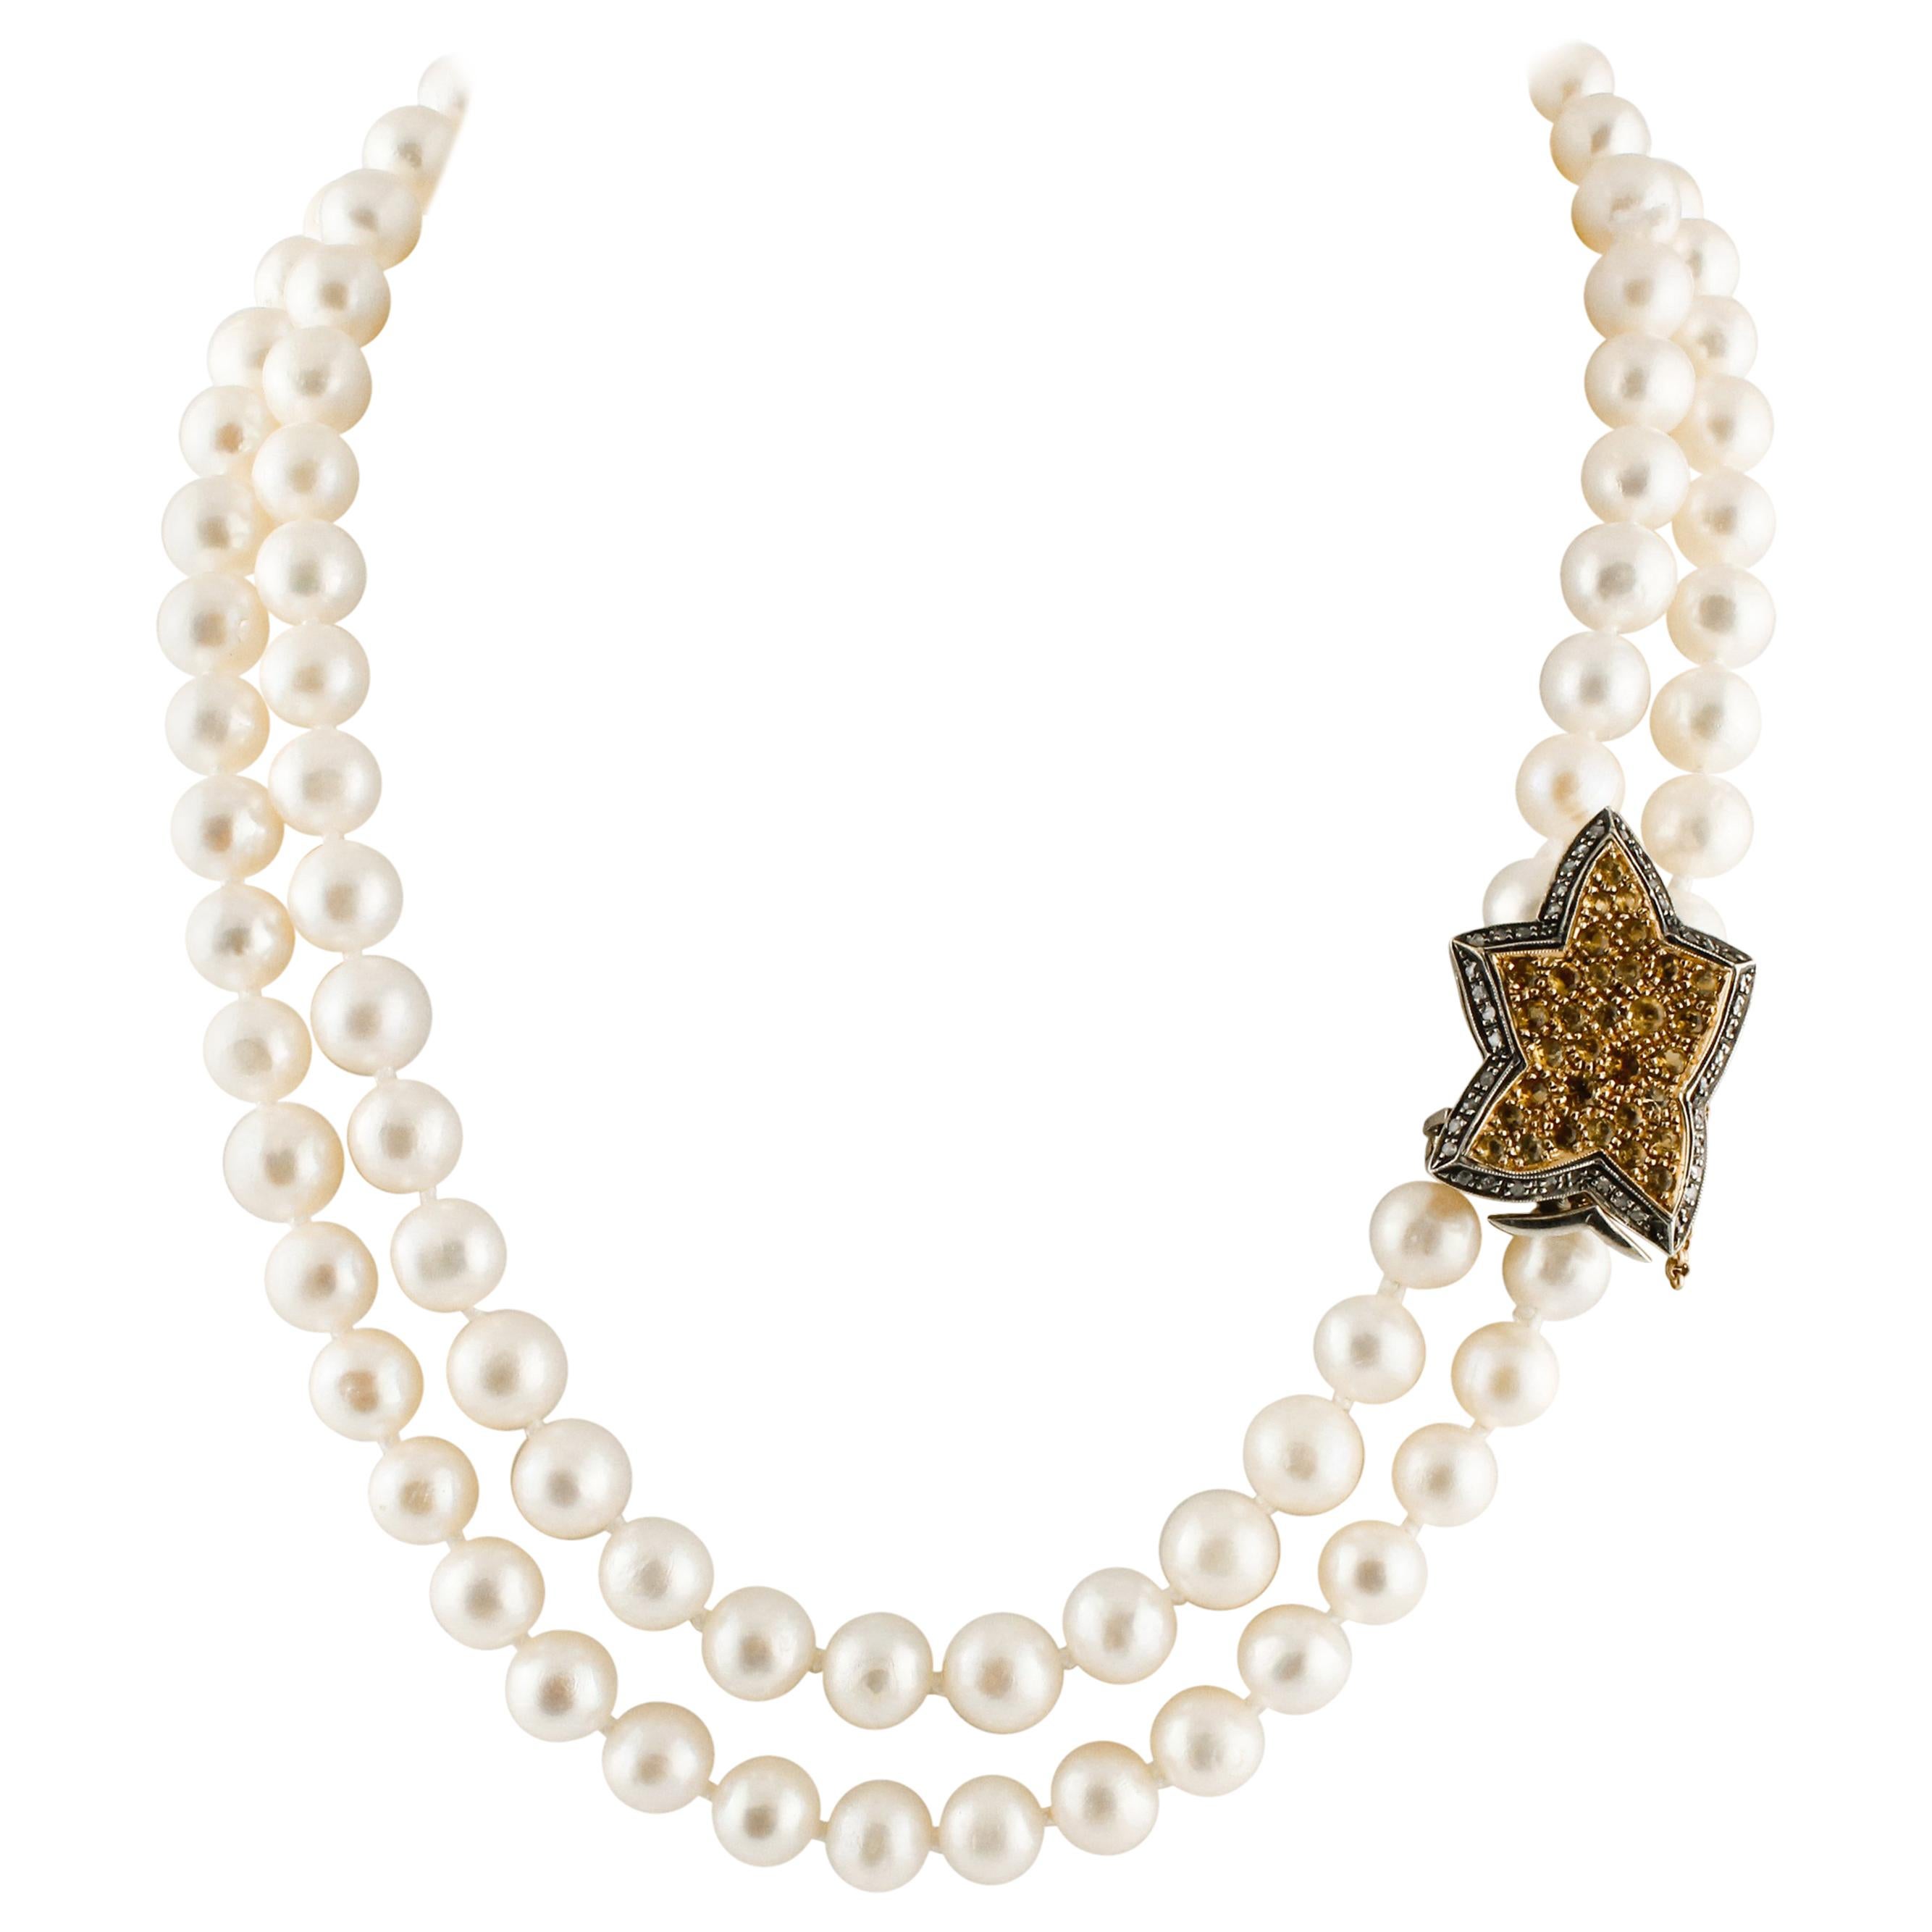 Diamonds Topazes Pearls White Rose Gold and Silver Beaded Necklace